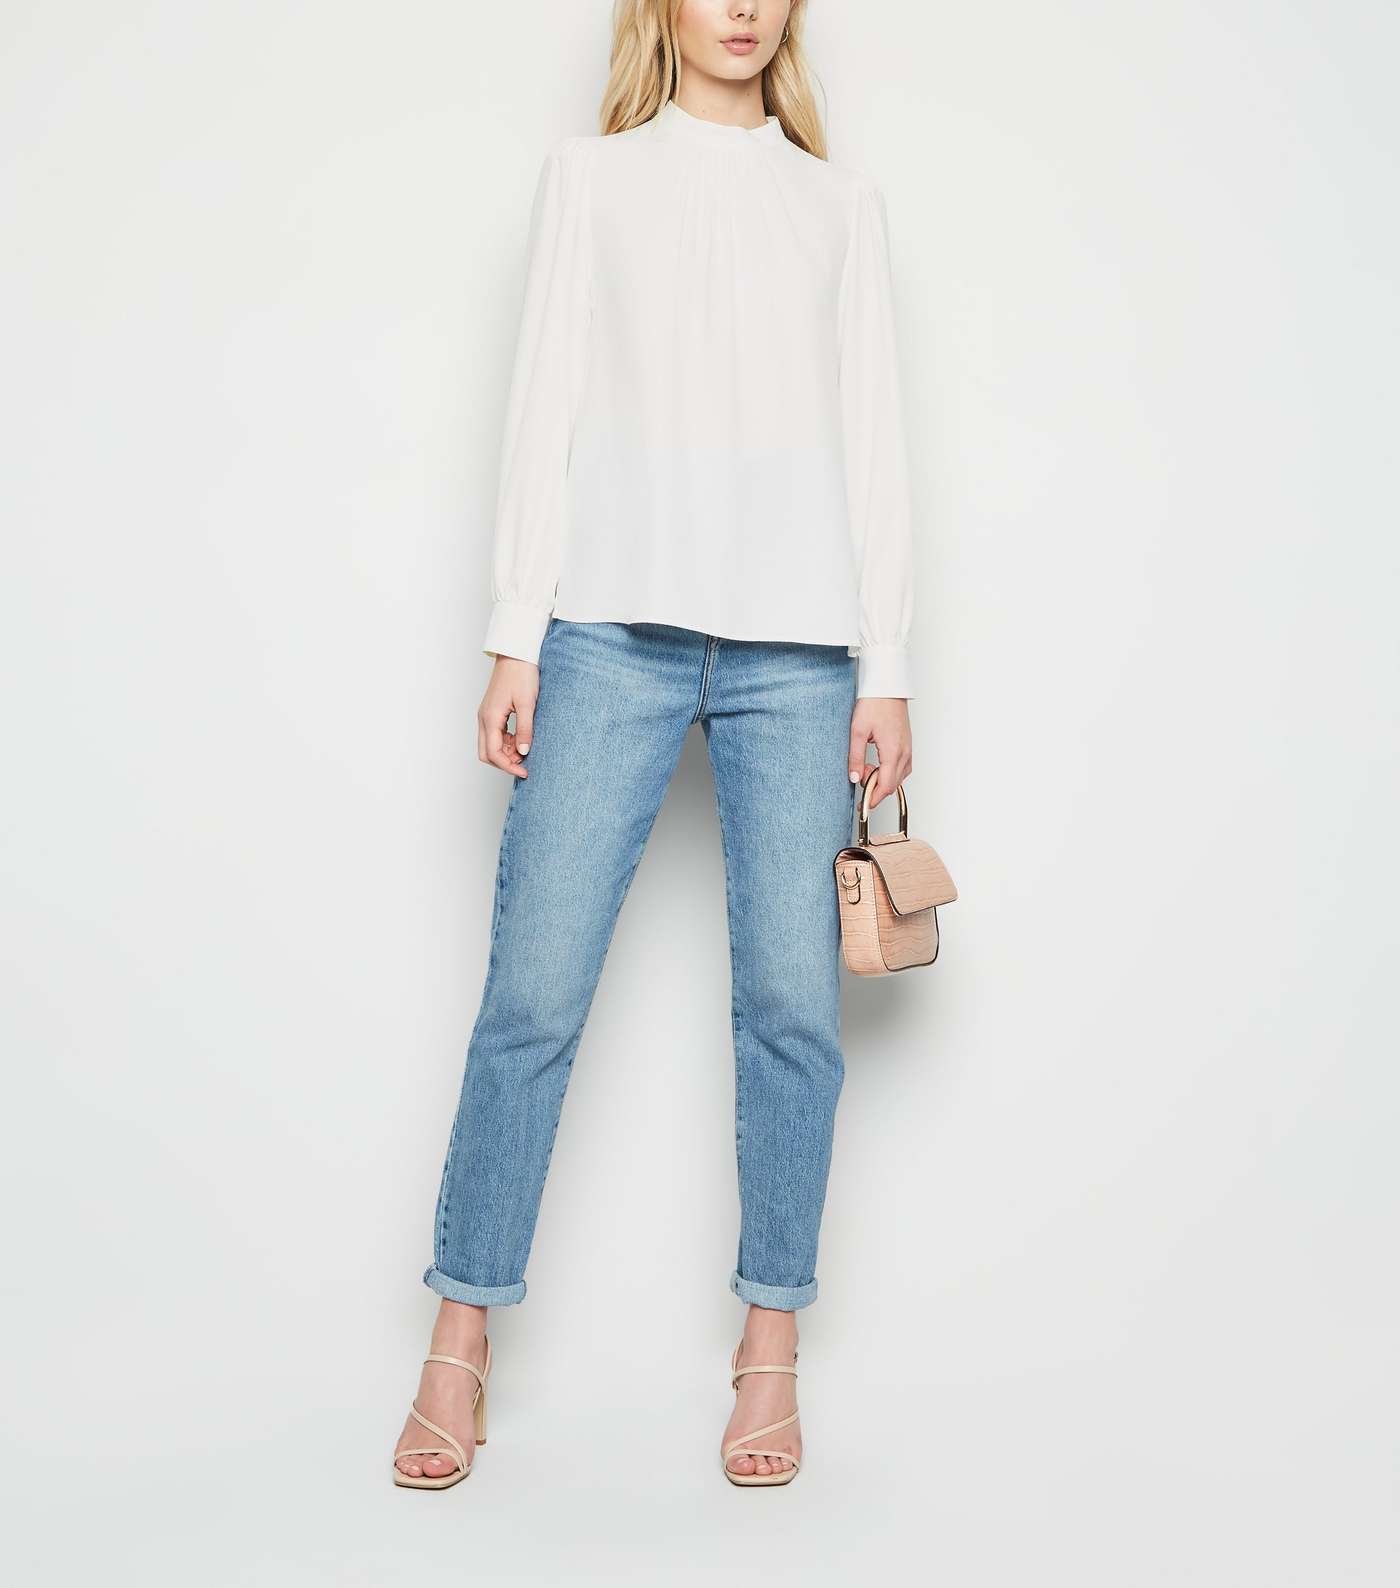 Off White High Neck Blouse Image 2